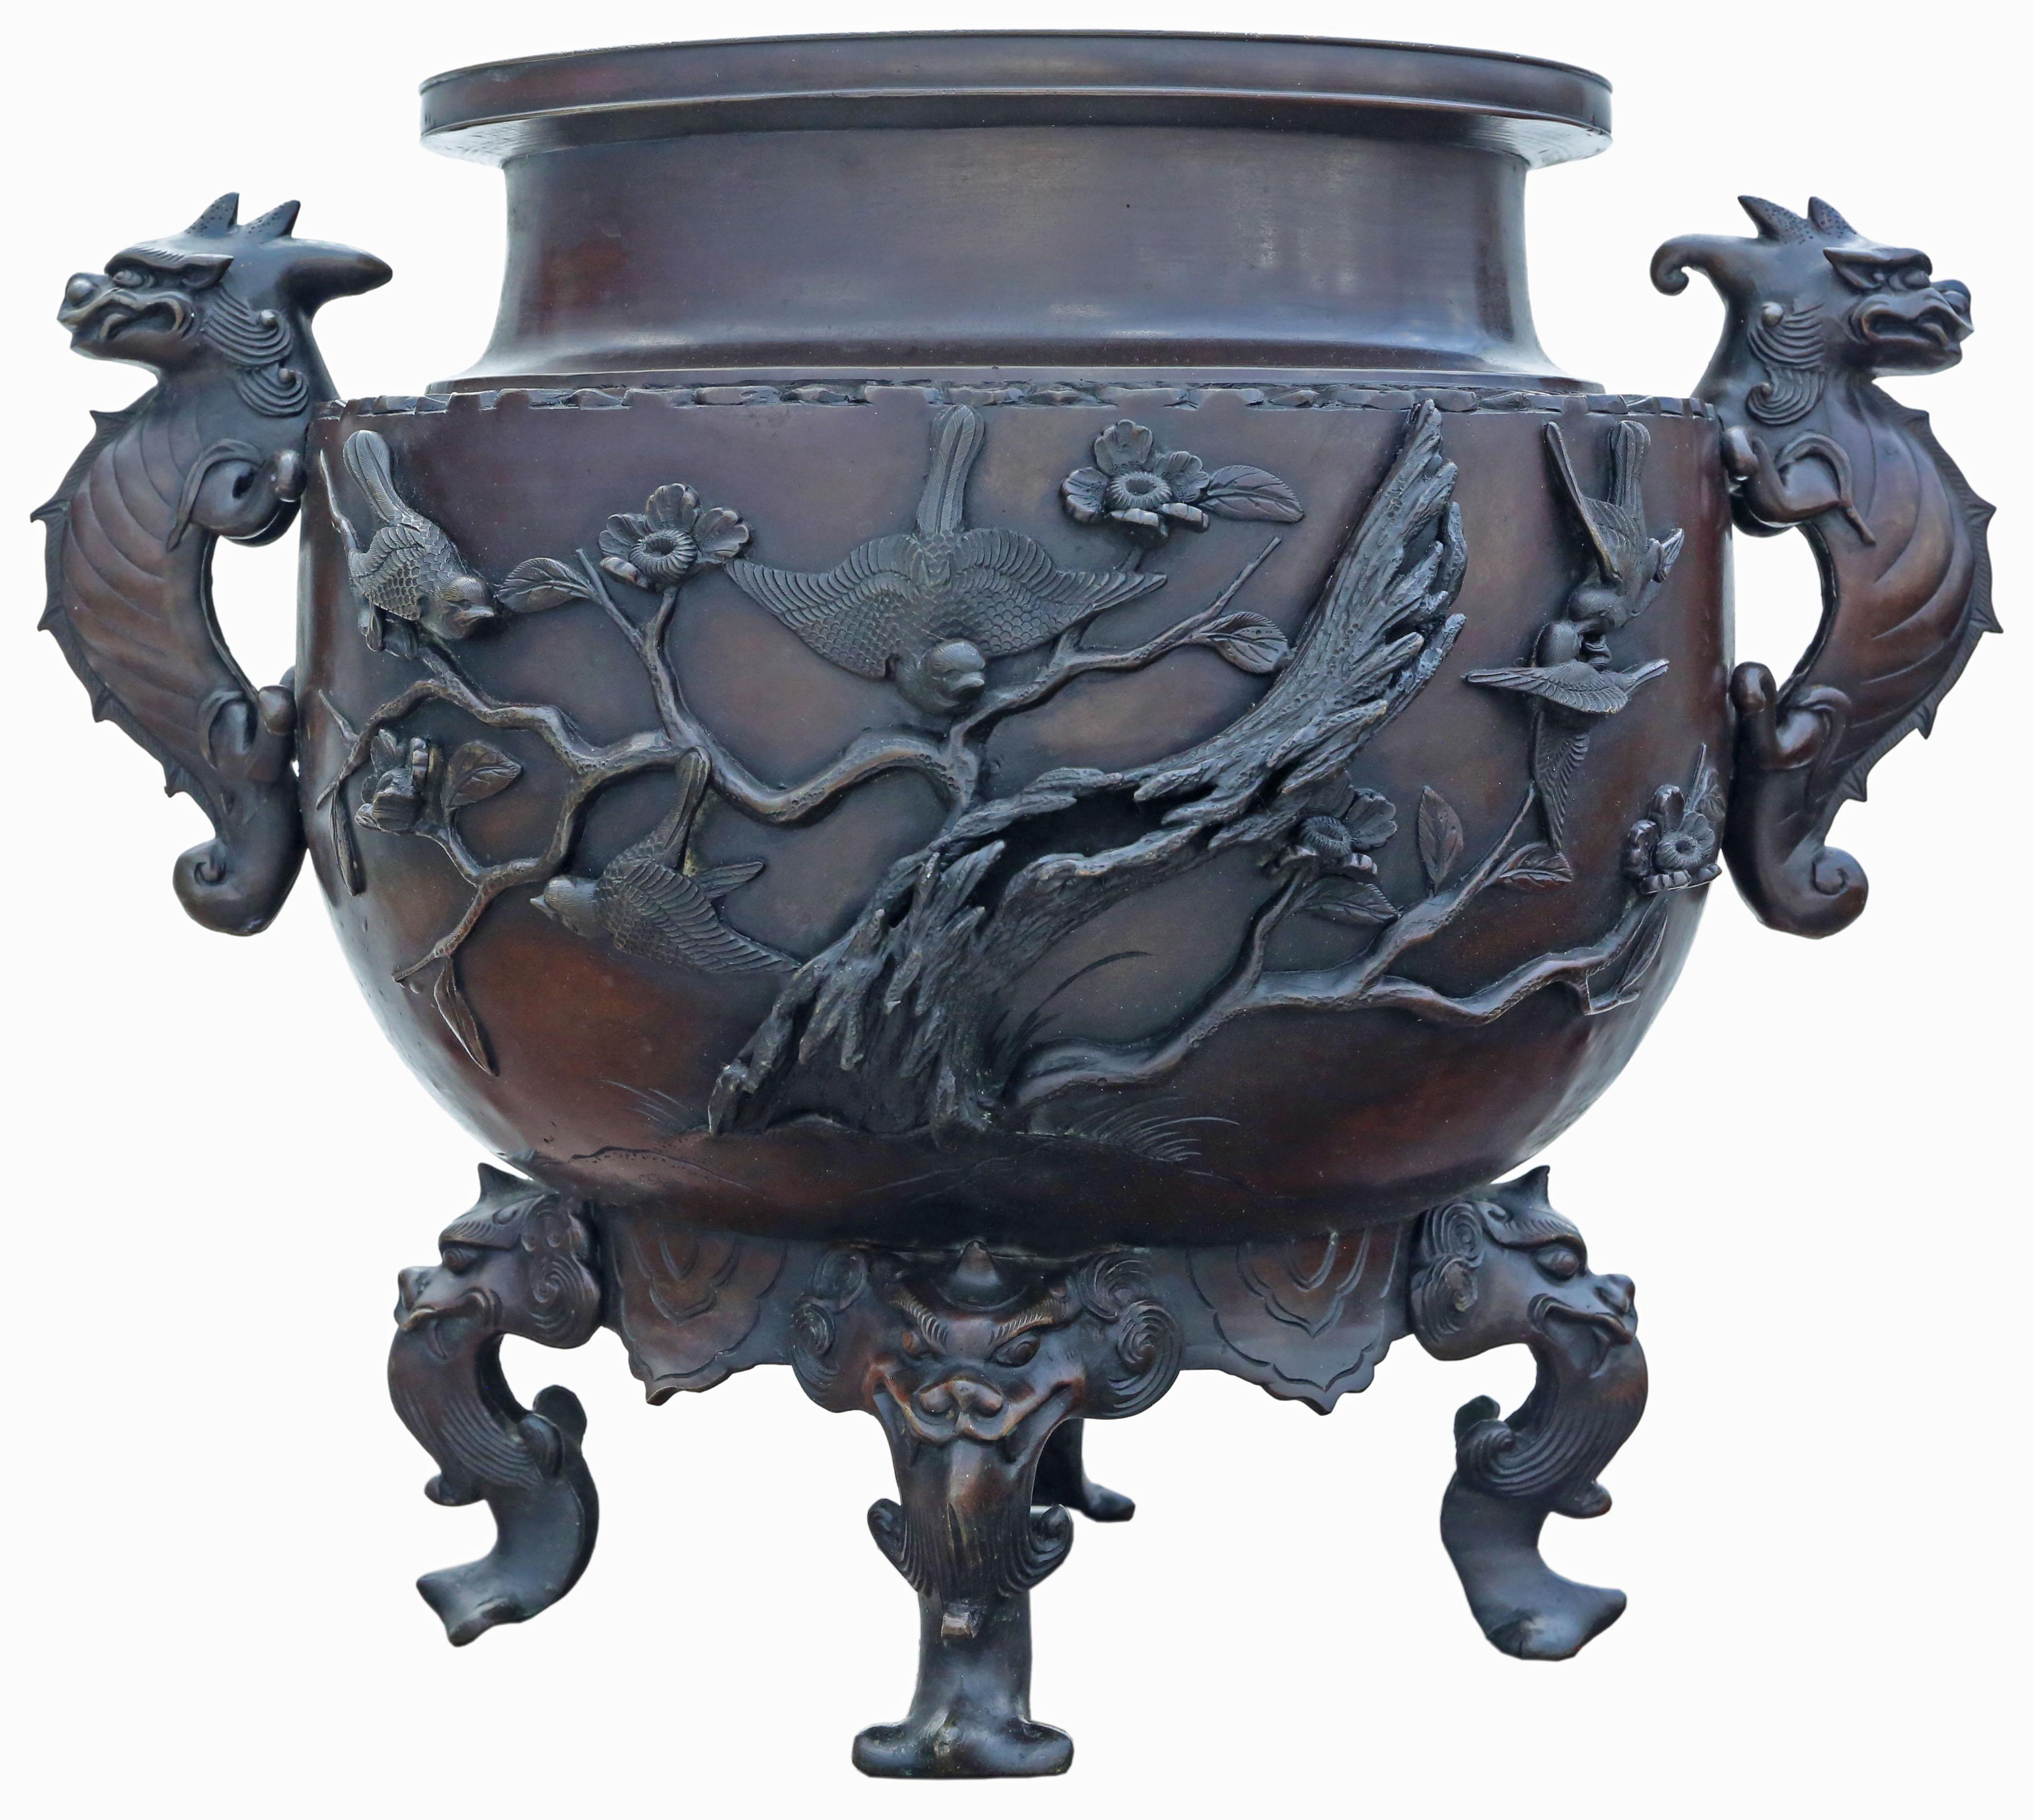 Antique Japanese Oriental Bronze Jardinière Planter Bowl Censor - Magnificent Meiji Period Piece!

This extraordinary bronze jardinière planter bowl, dating back to the Meiji Period circa 1900, epitomizes the beauty and craftsmanship of Japanese